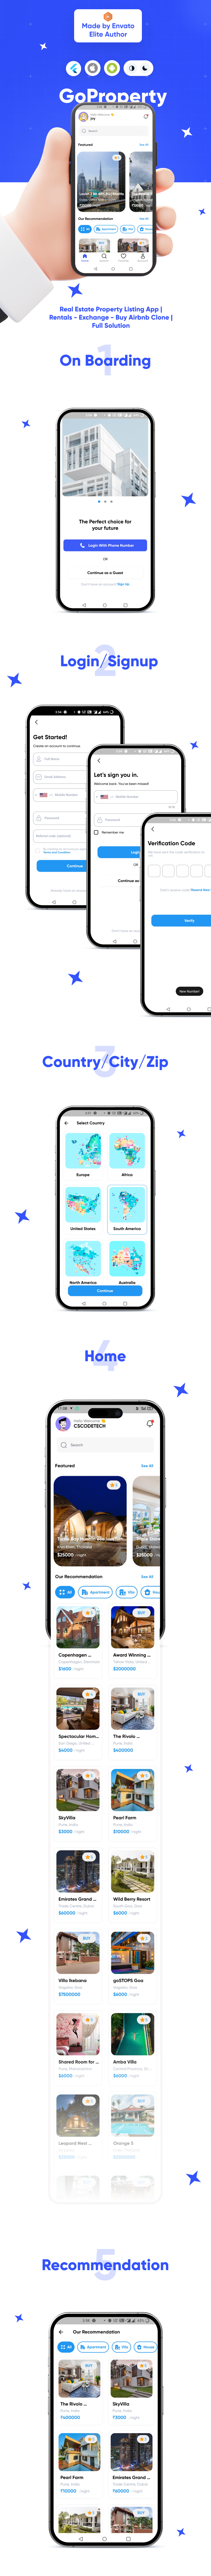 GoProperty - Real Estate Property Listing App | Rentals-Exchange-Buy | Airbnb Clone | Full Solution - 1